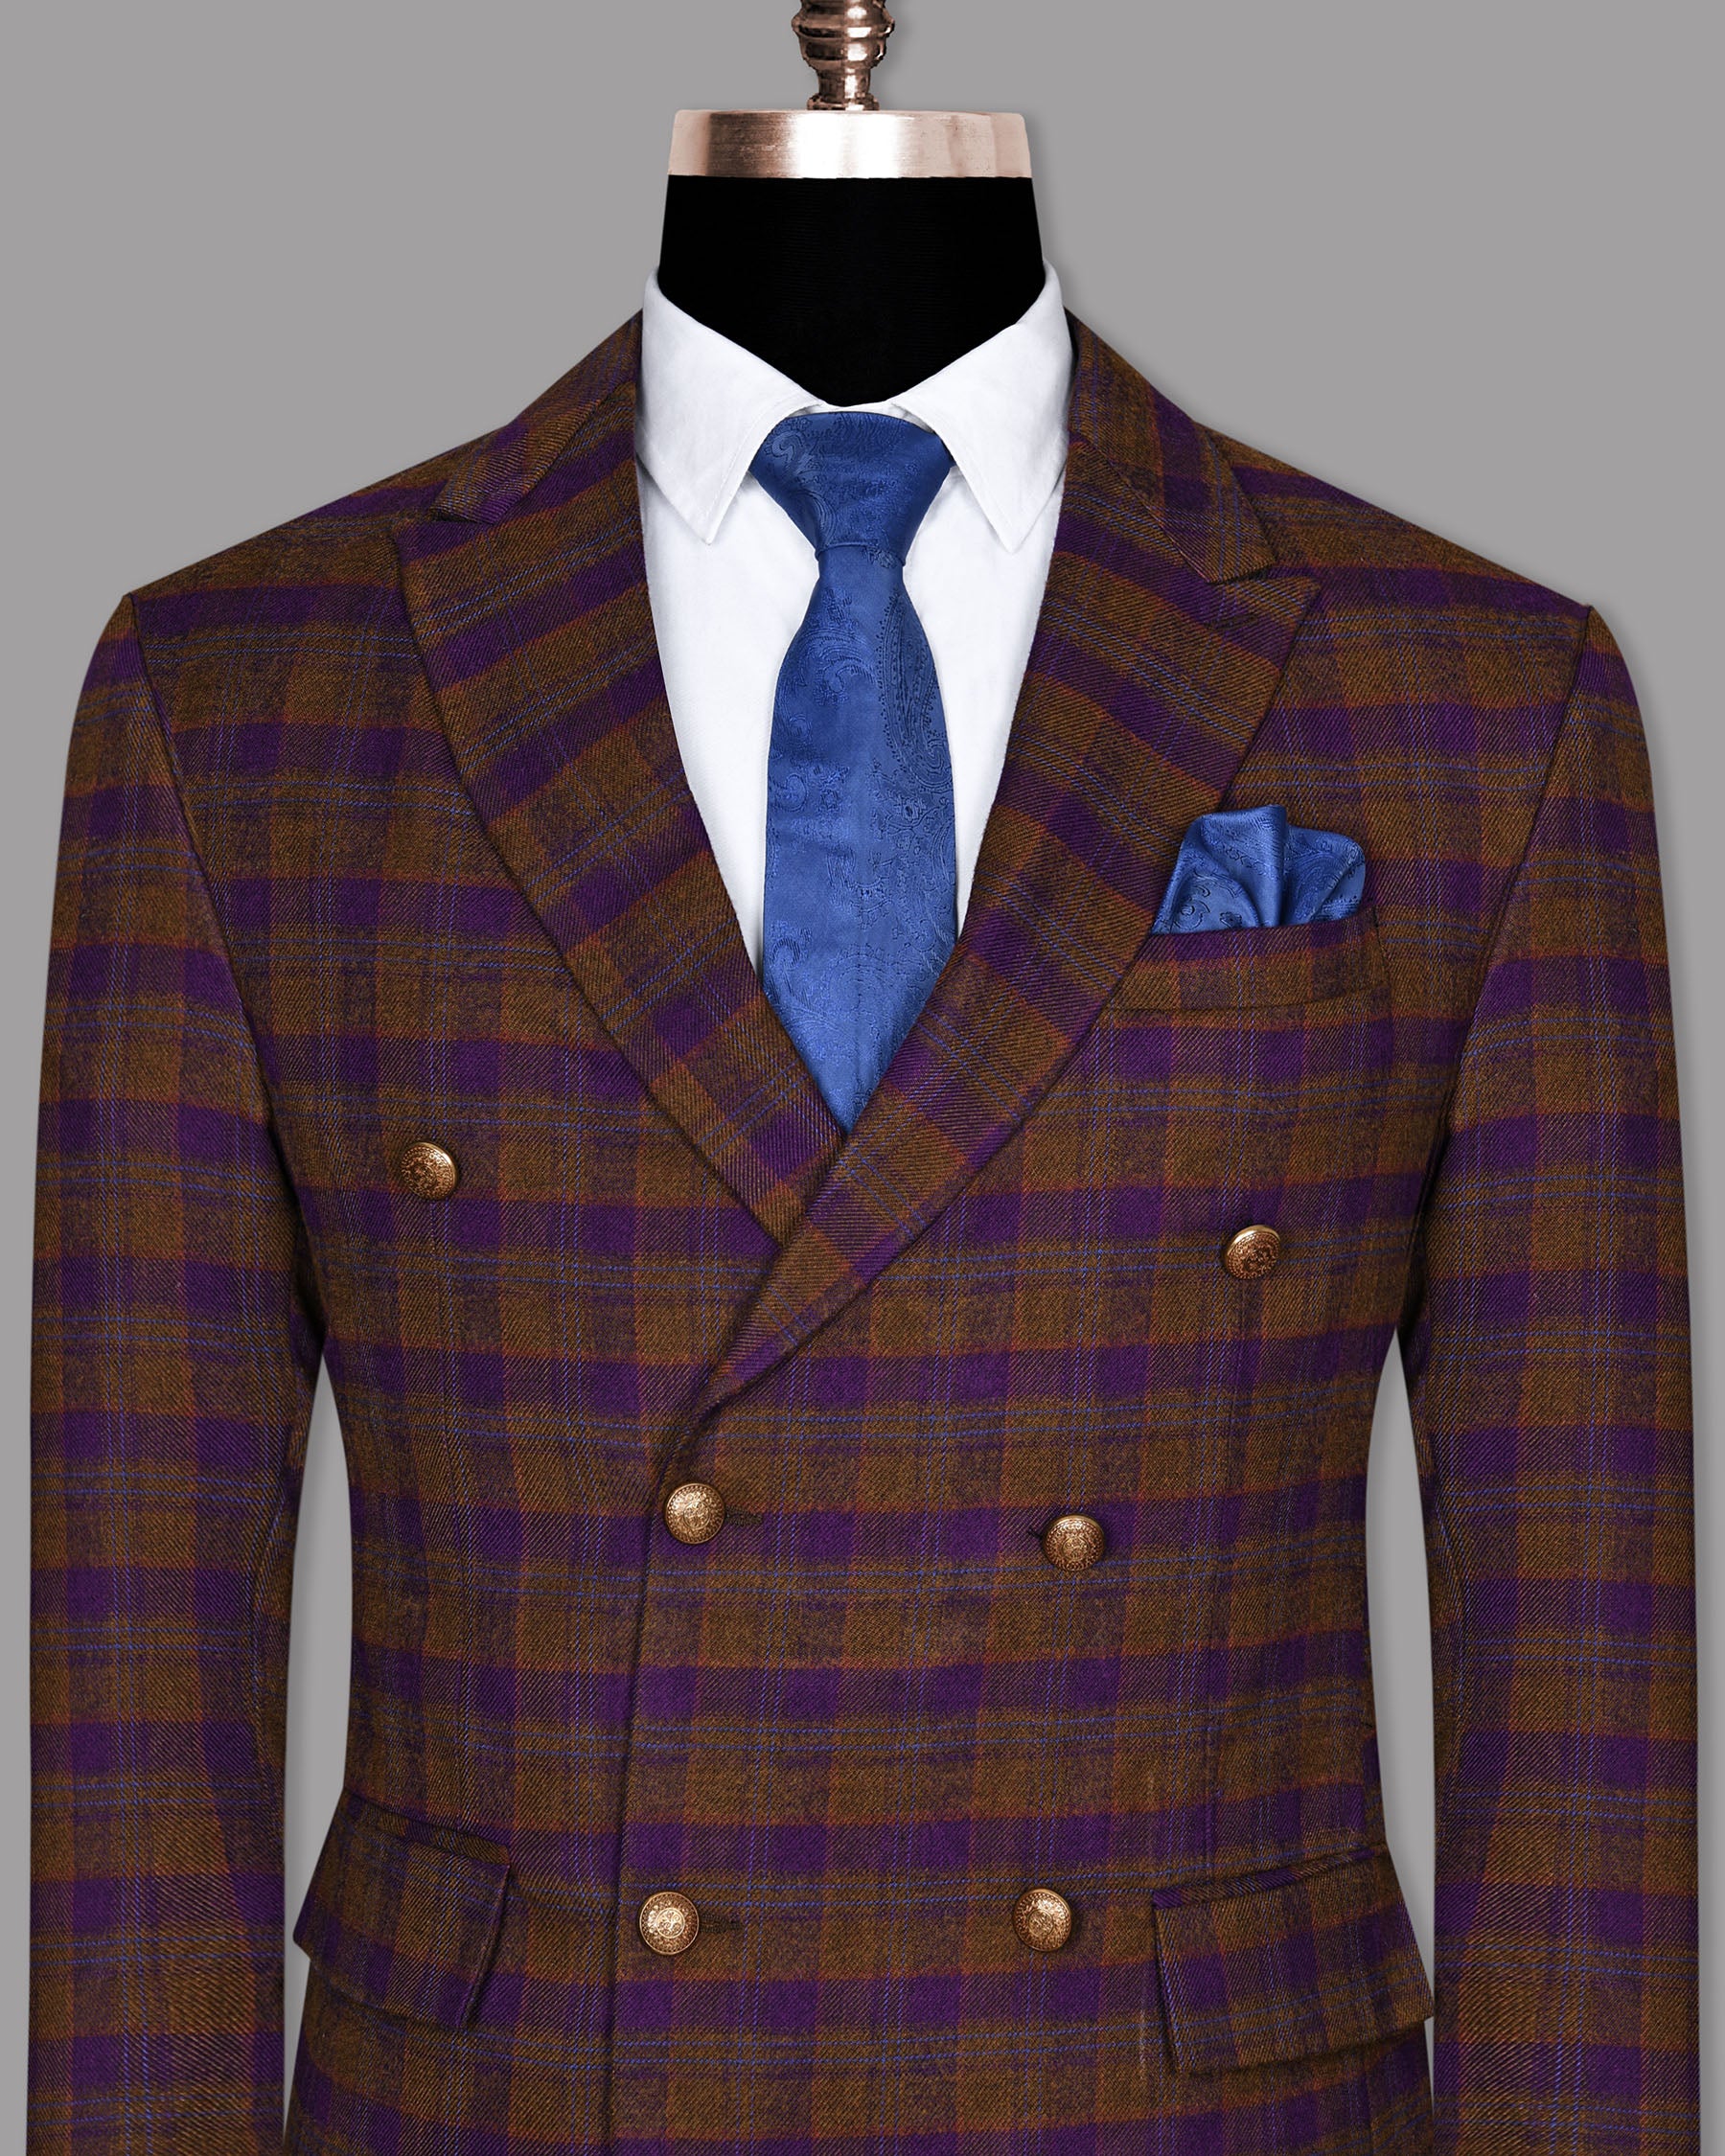 Brown with Purple Checked Flannel Wool Double Breasted Tweed Blazer BL687DB-38, BL687DB-40, BL687DB-42, BL687DB-44, BL687DB-46, BL687DB-48, BL687DB-50, BL687DB-52, BL687DB-60, BL687DB-36, BL687DB-54, BL687DB-56, BL687DB-58